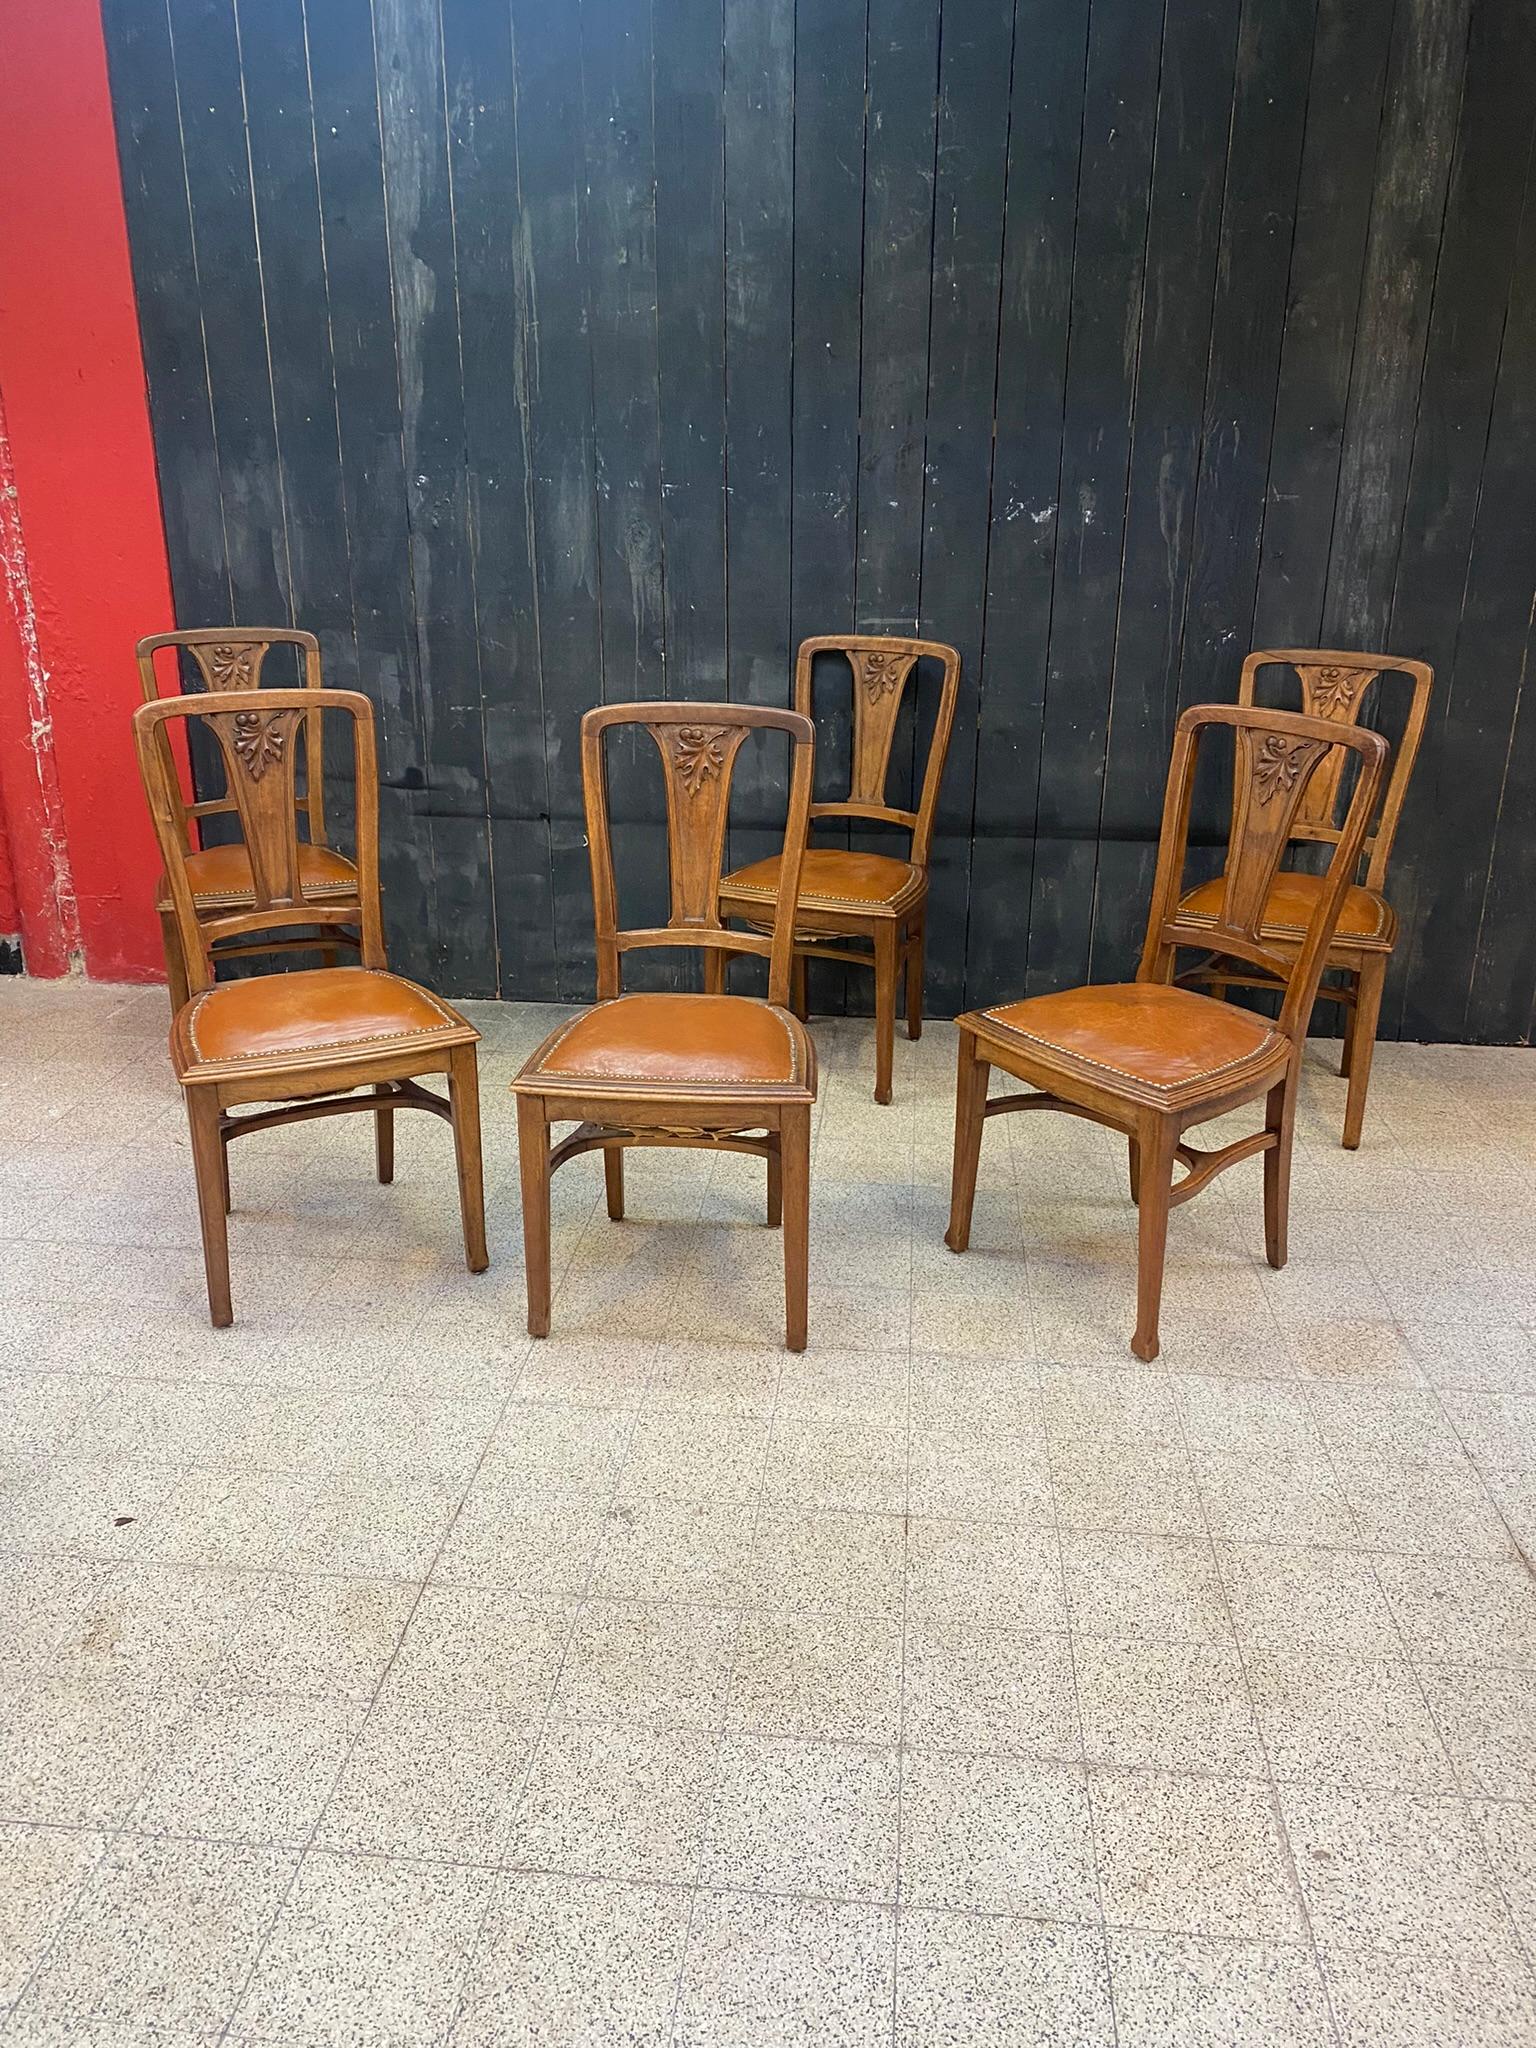 Attributed to Gauthier-Poinsignon & Cie, 6 Art Nouveau chairs in walnut with camel leather seats.
(stains on some chairs, restoration and screws on 2 chairs).
A table and 2 buffets on the model available.